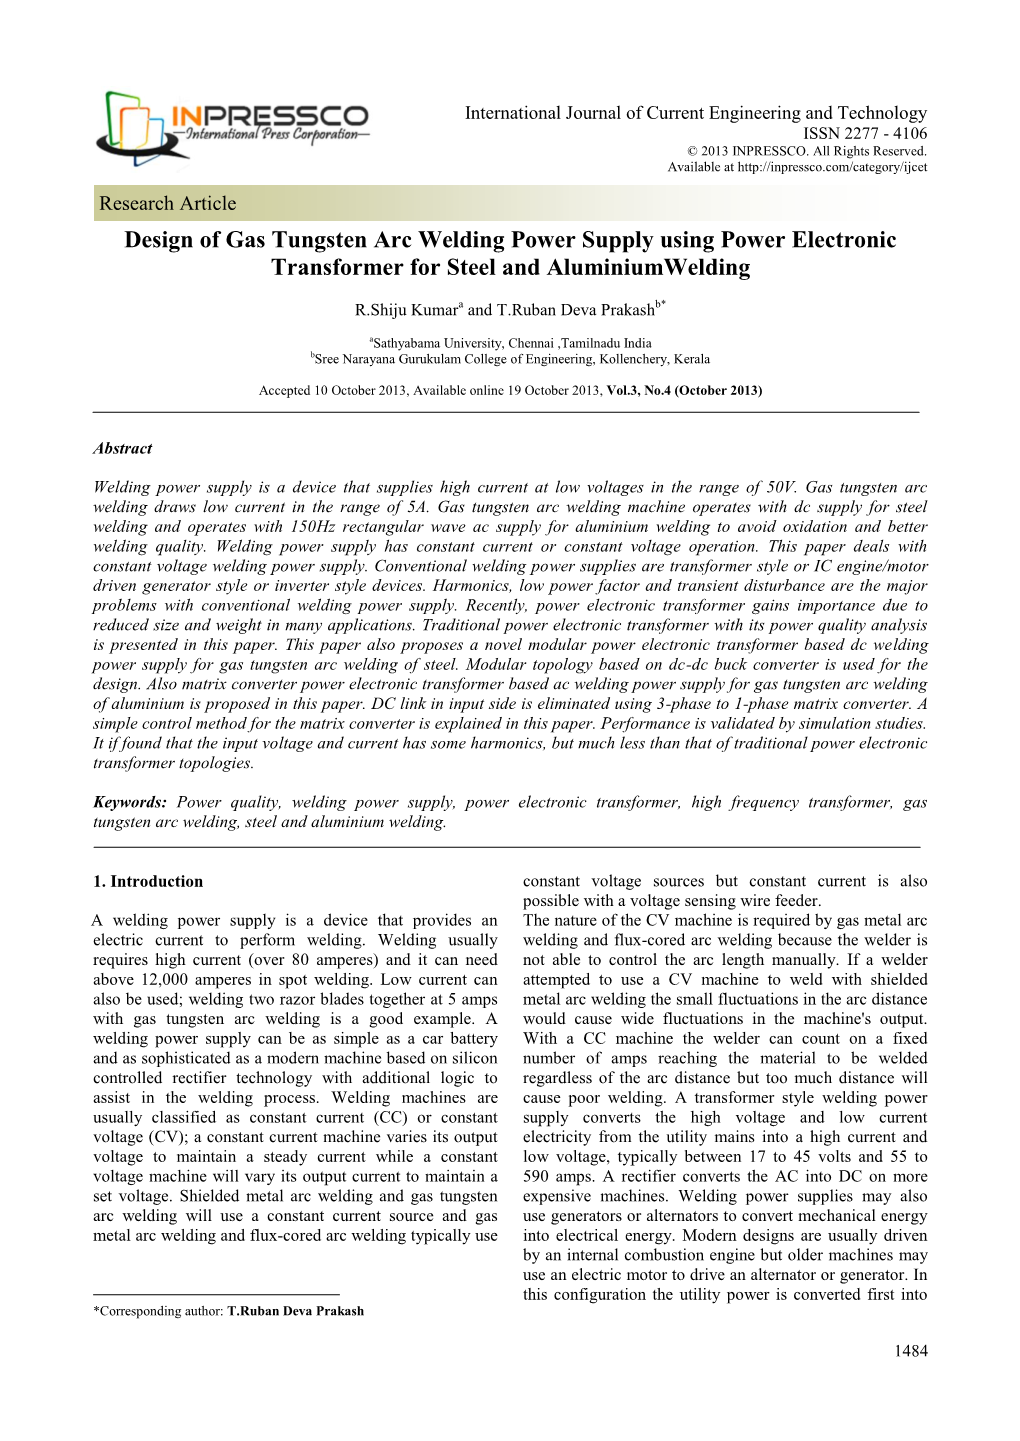 Design of Gas Tungsten Arc Welding Power Supply Using Power Electronic Transformer for Steel and Aluminiumwelding